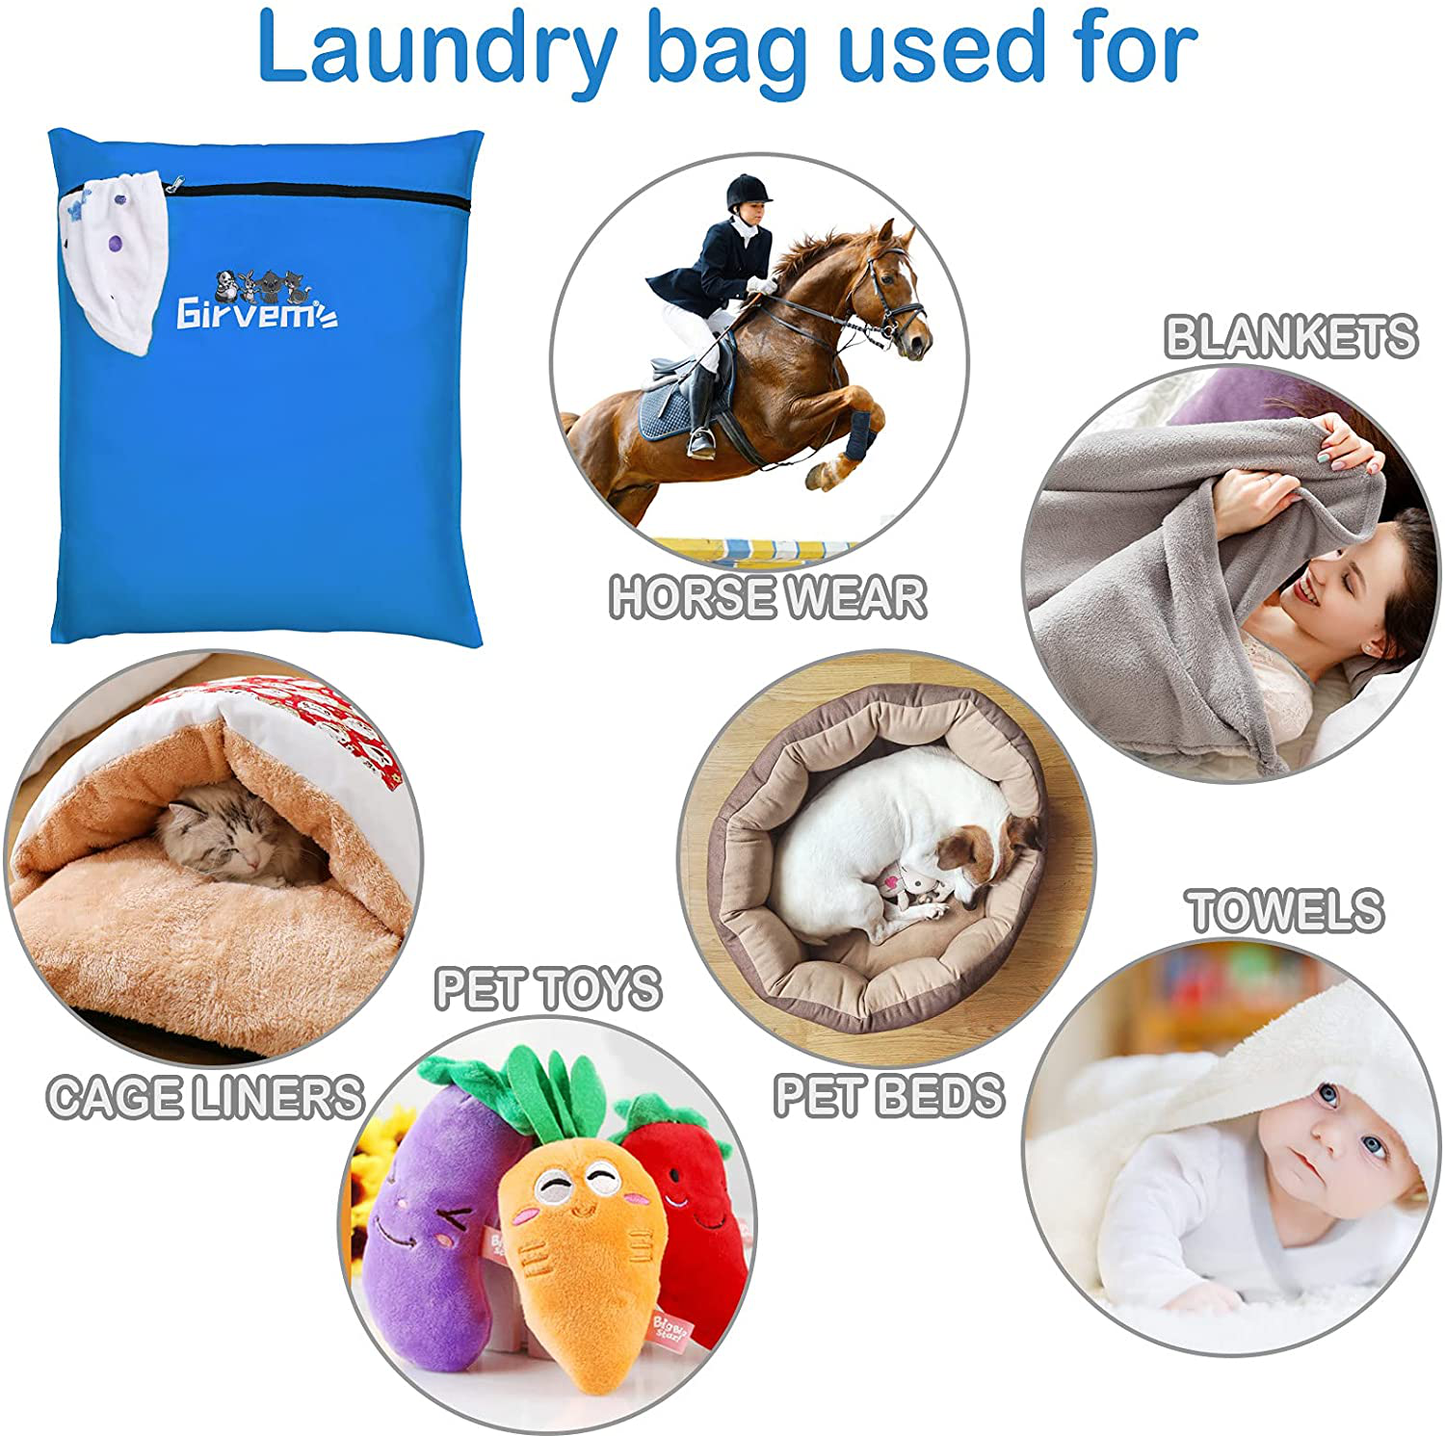 Pet Laundry Bag to Stops Pet Hair Blocking the Washing Machine Pet Laundry Helper for Guinea Pigs, Rabbits, Small Animal Fleece Bedding, Midwest Cage Liners, C&C Cage Liners, and More, Blue